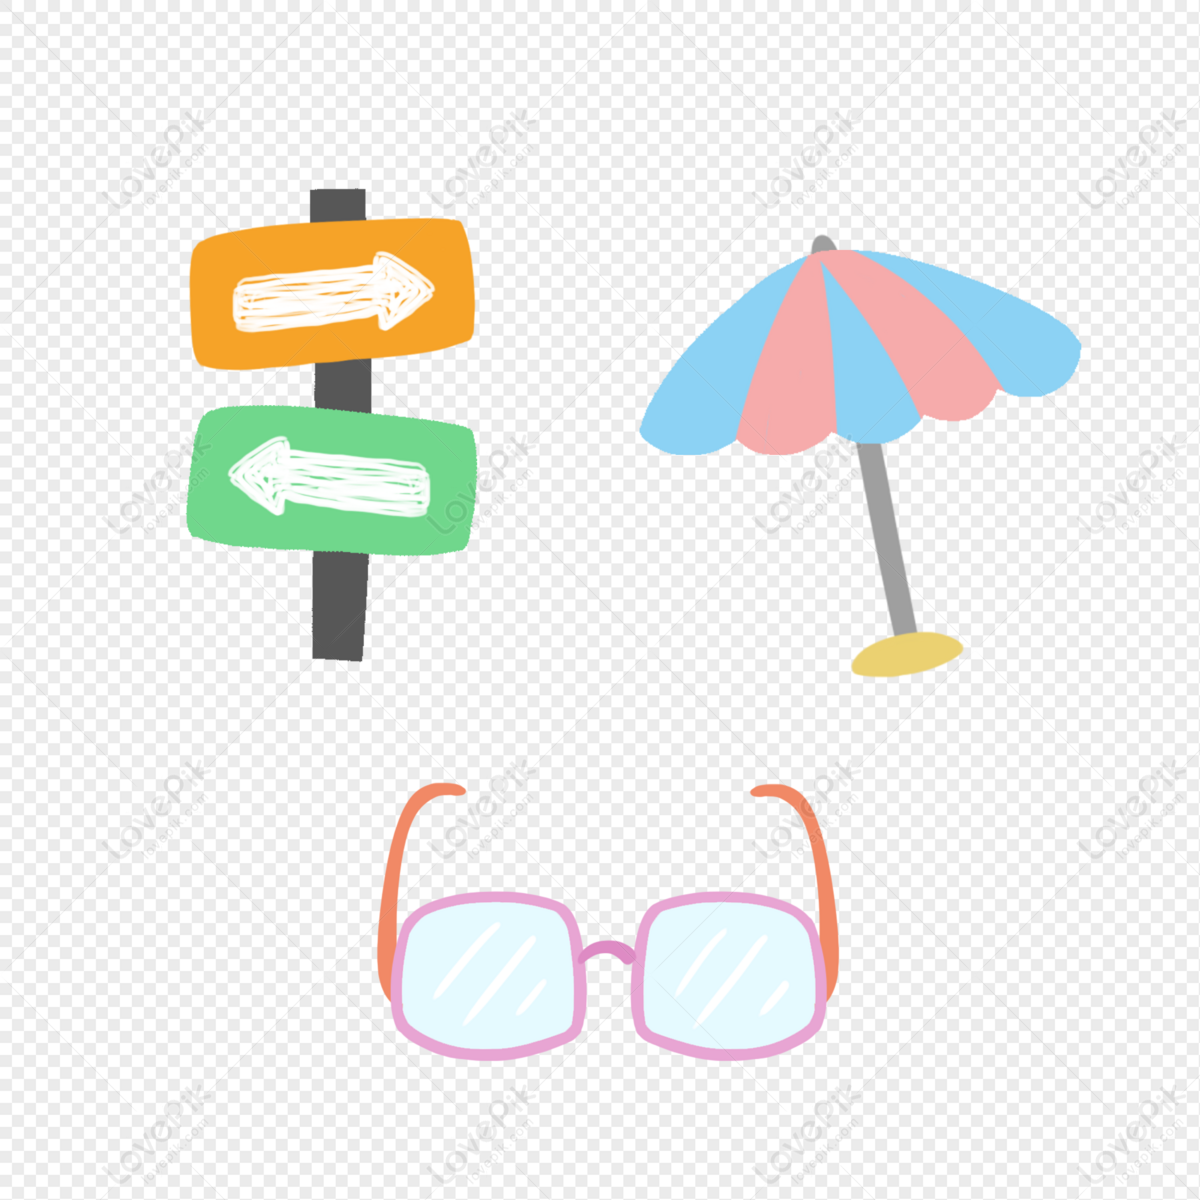 National Day travel outings refer to street signs glasses umbrel, Travel,  travel,  travel png hd transparent image